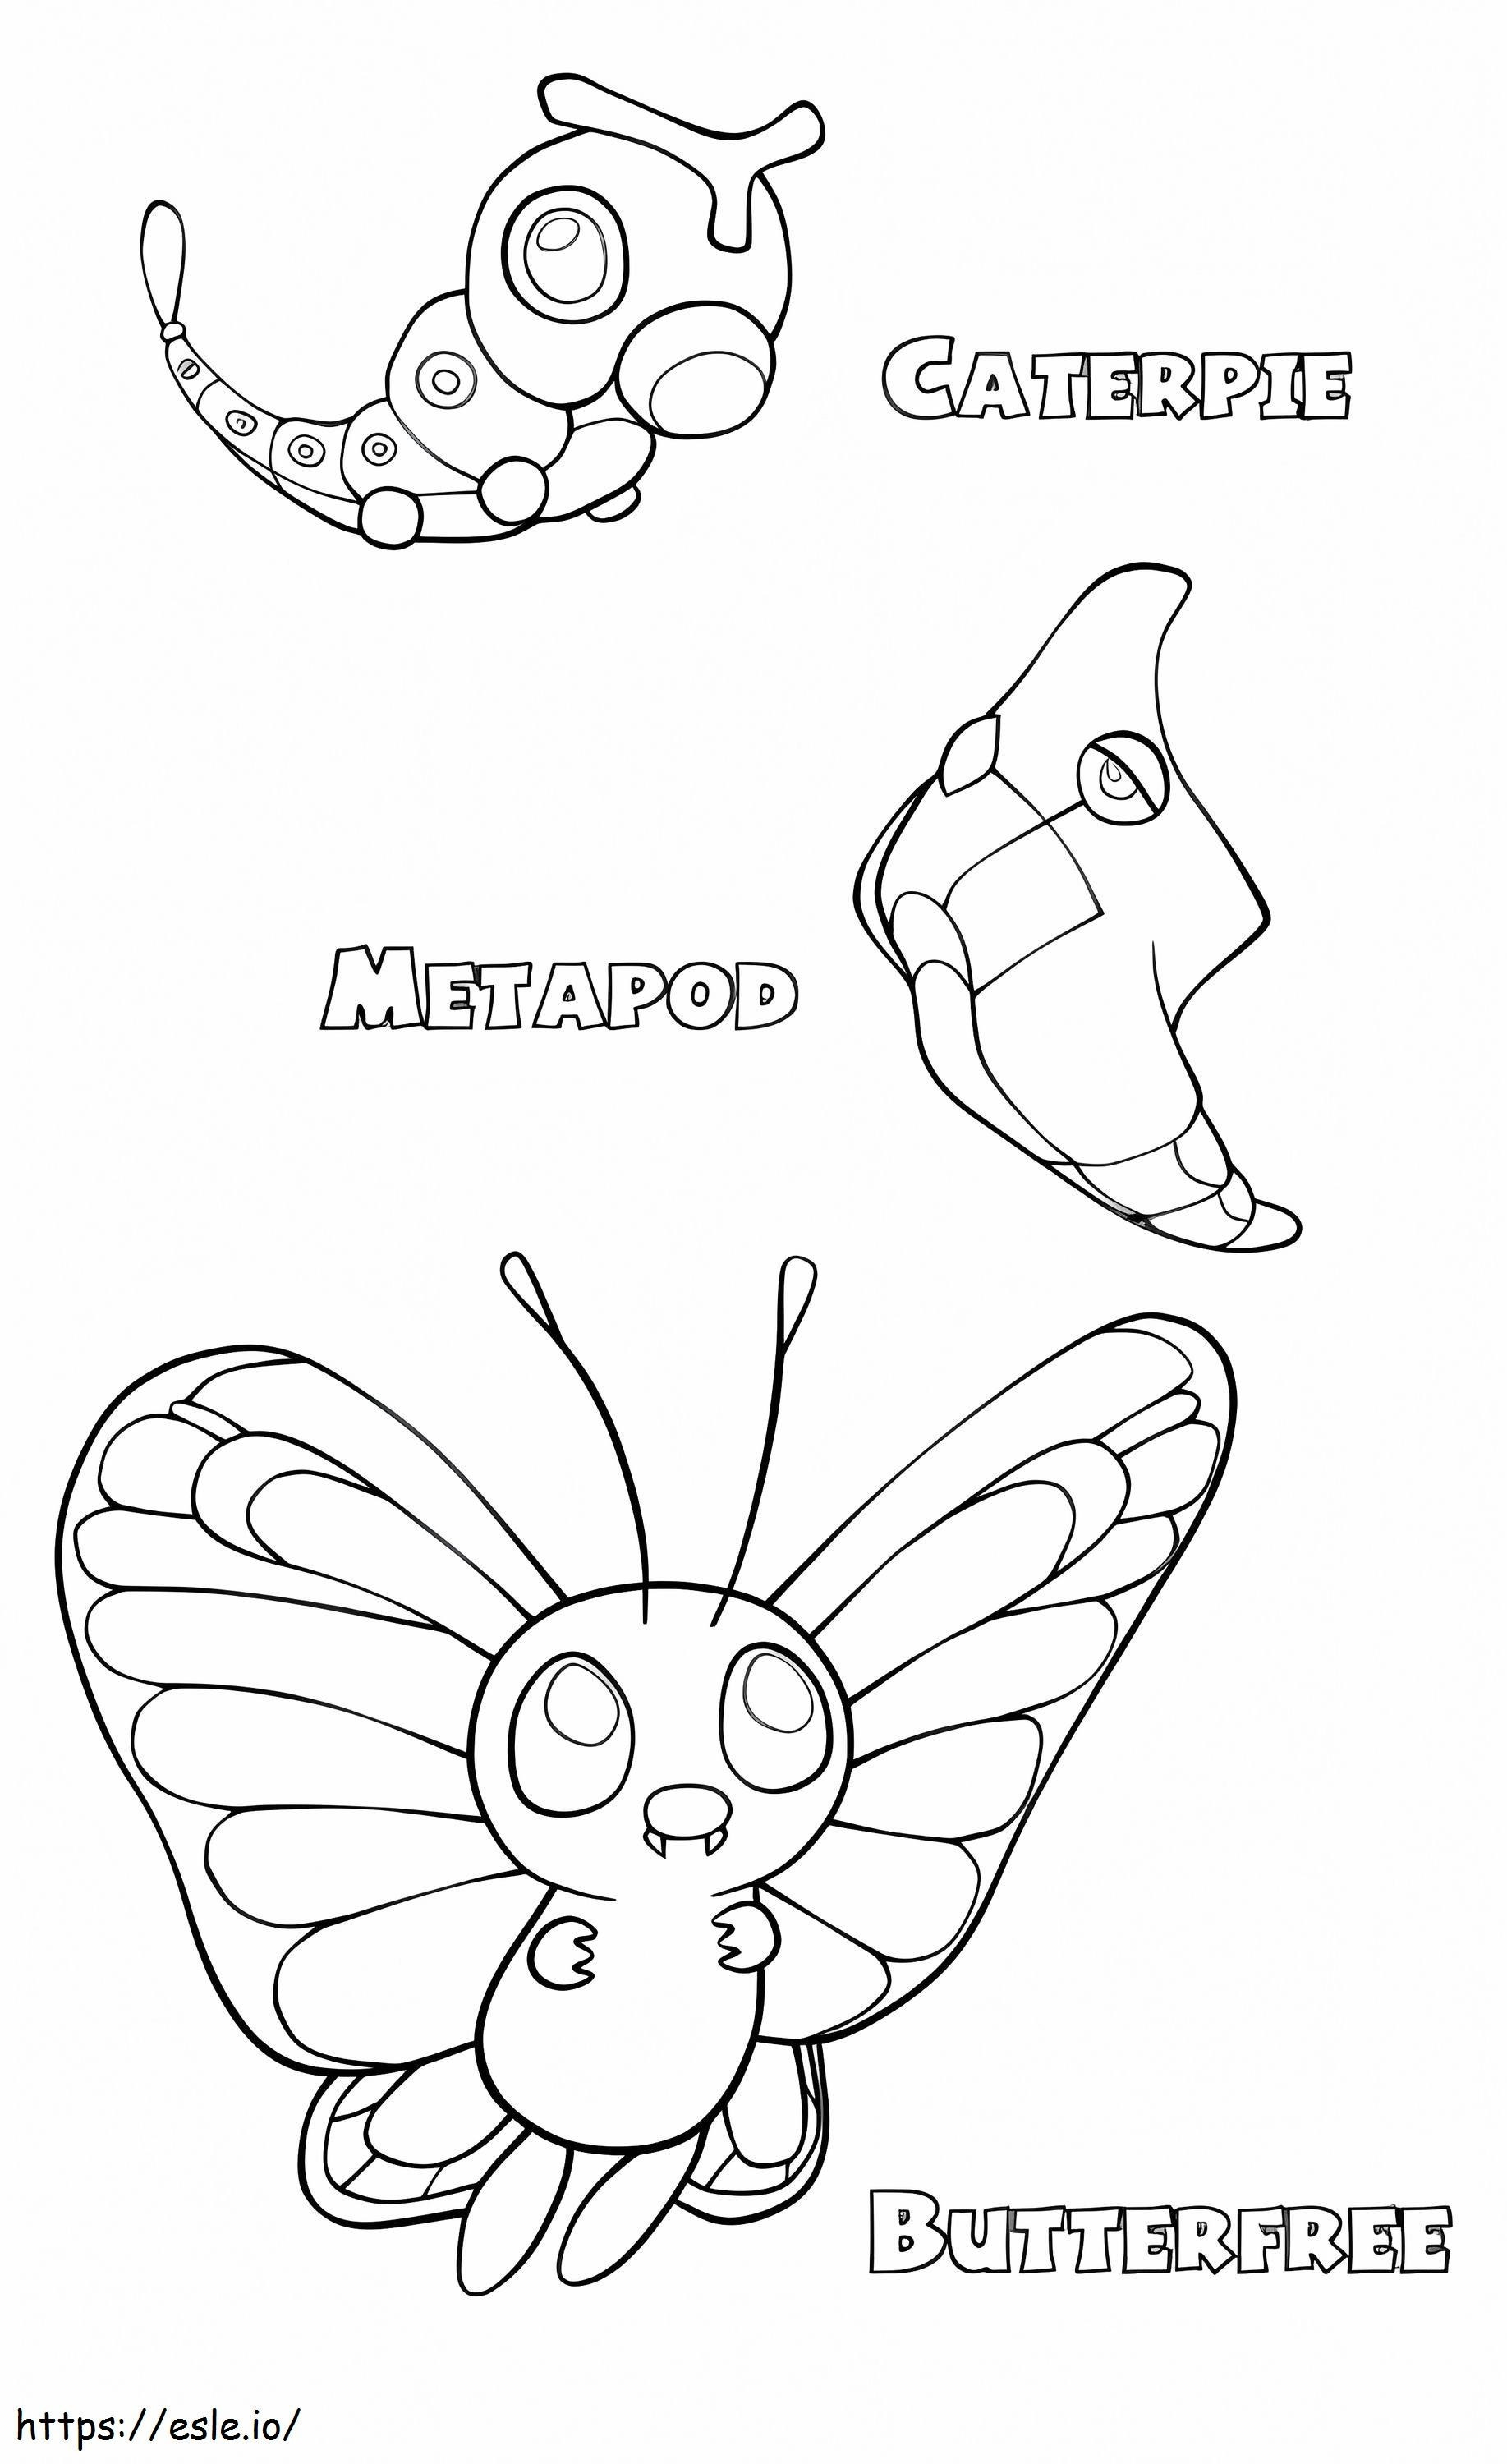 Butterfree Evolution coloring page